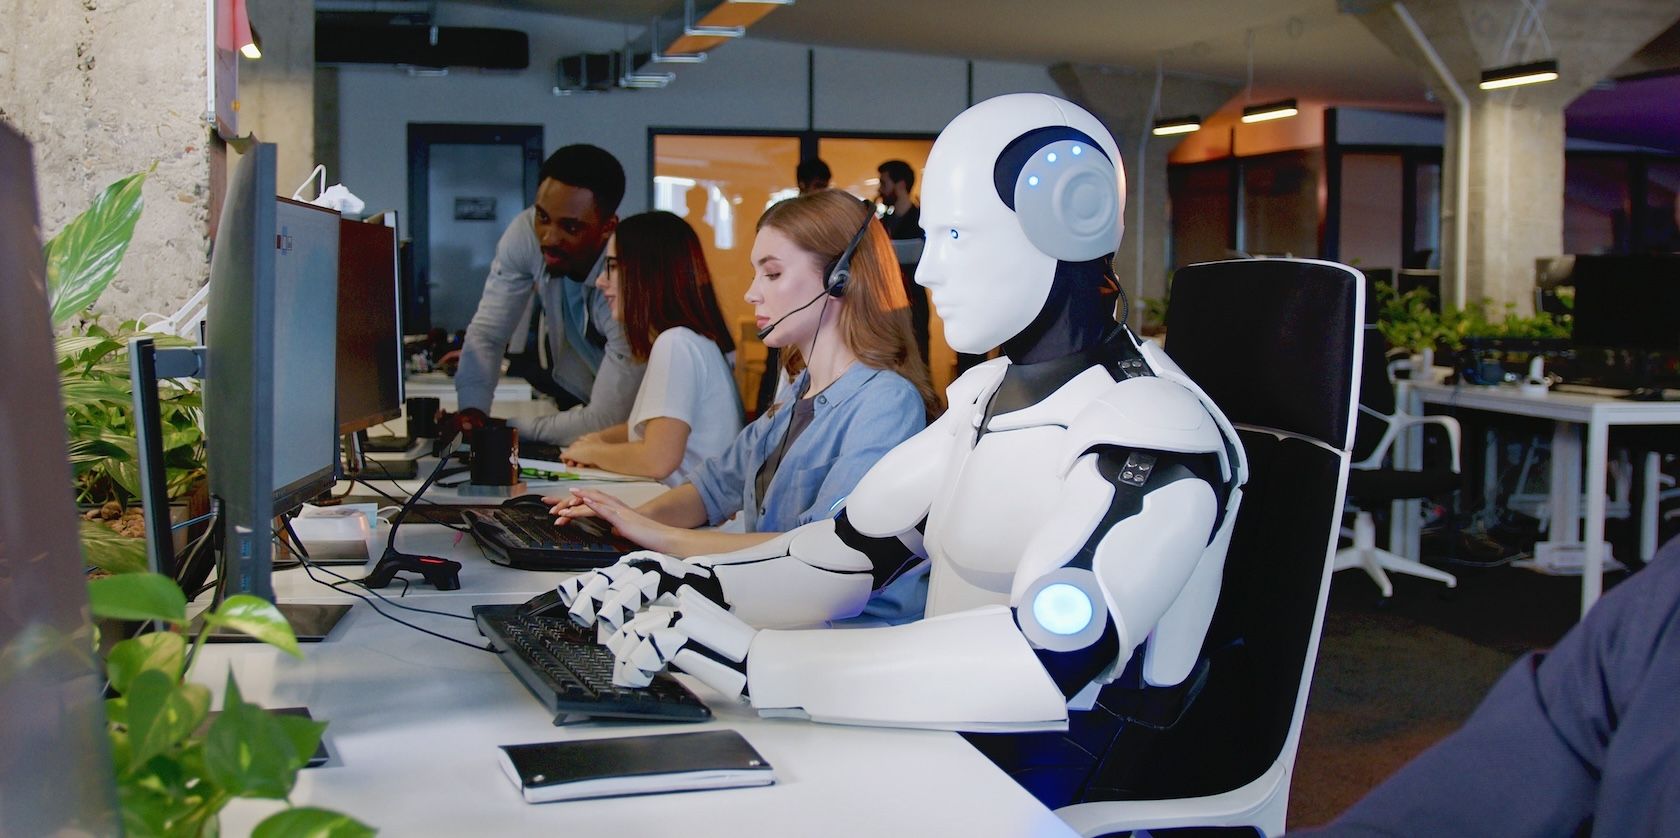 A robot sits at a desk appearing to type on a keyboard, working alongside human employees.